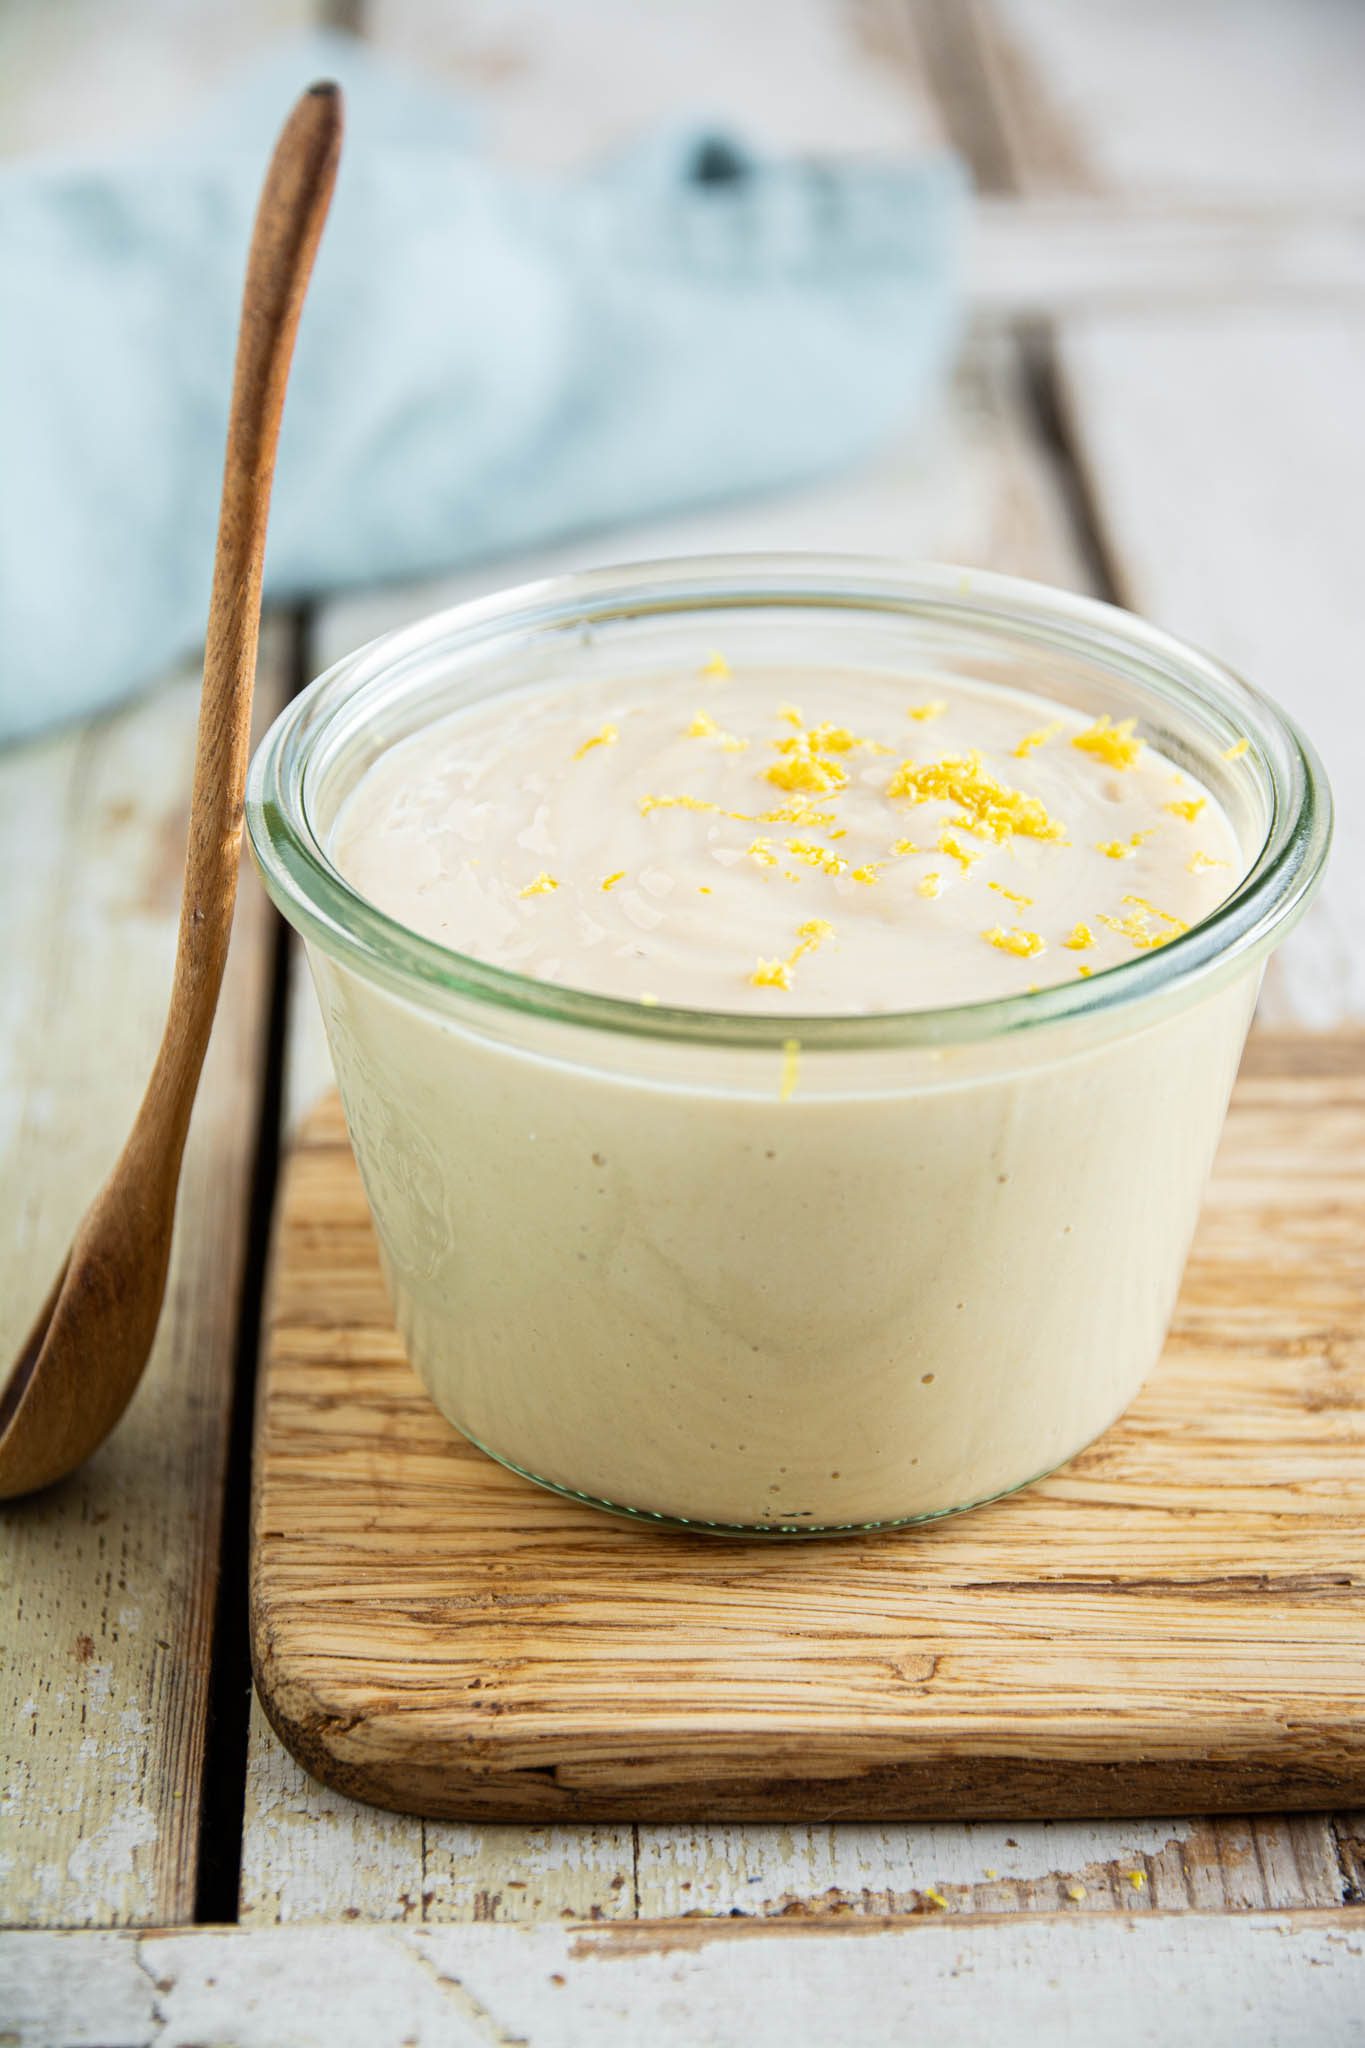 Learn how to make a no cook healthy gluten-free vegan lemon custard aka pastry cream. Besides, this vegan custard is oil-free as well as low-fat and takes under 10 minutes to make.